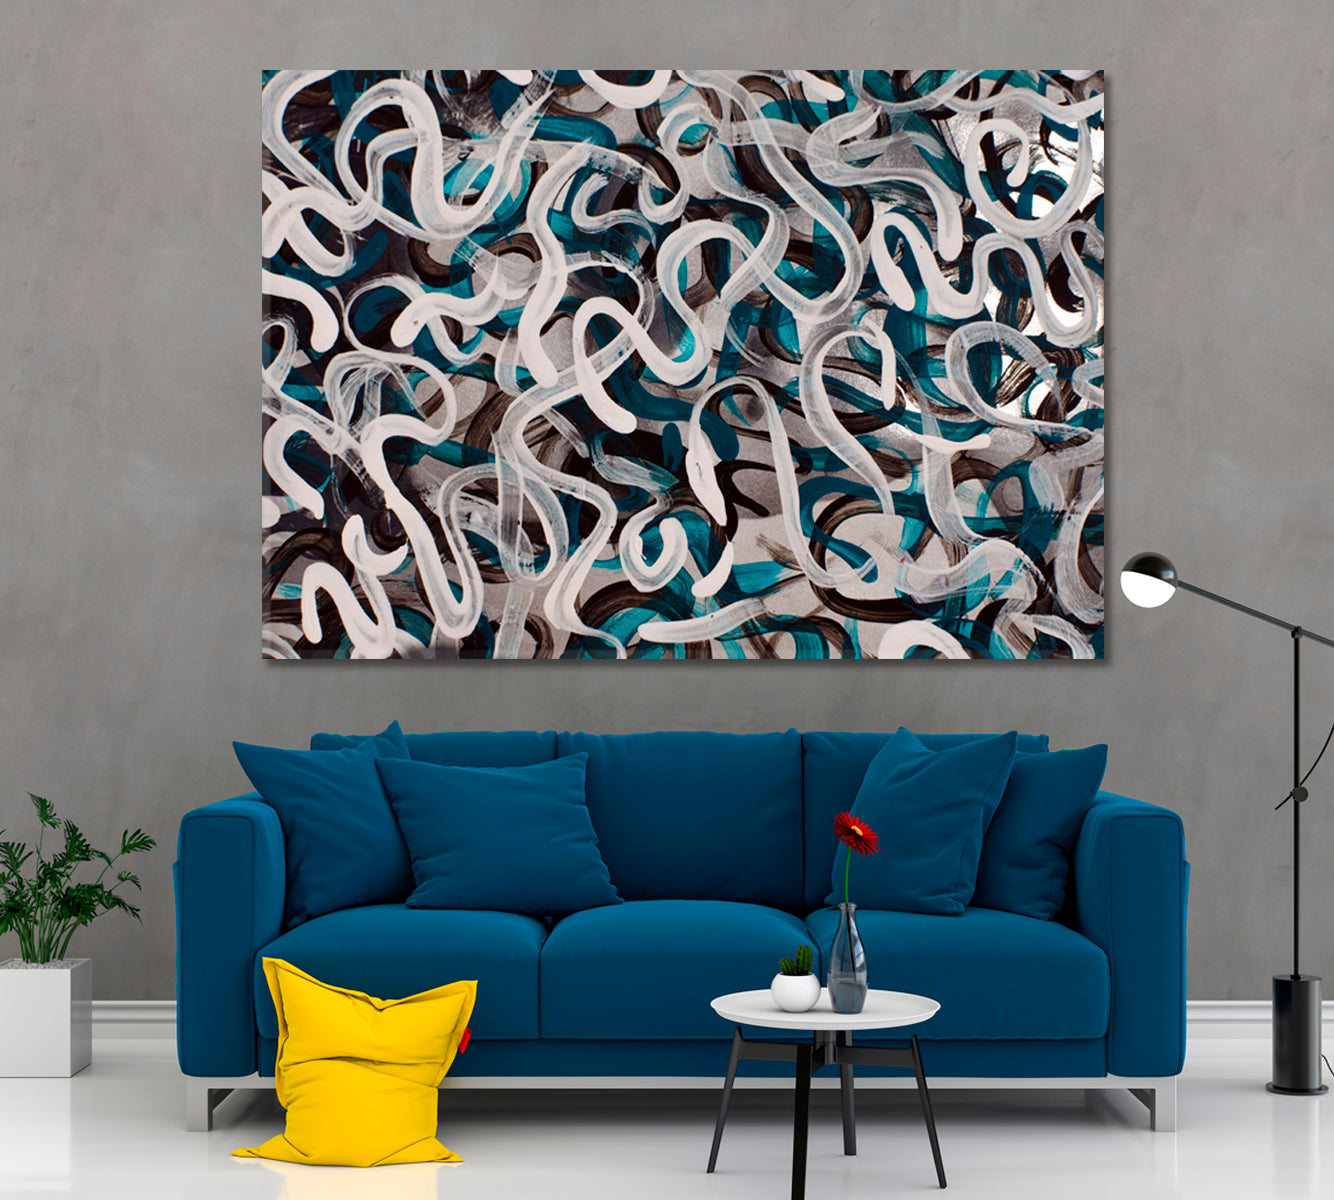 INSPIRED BY POLLOCK Turquoise Brown White Gray Strokes Modern Art Contemporary Art Artesty   